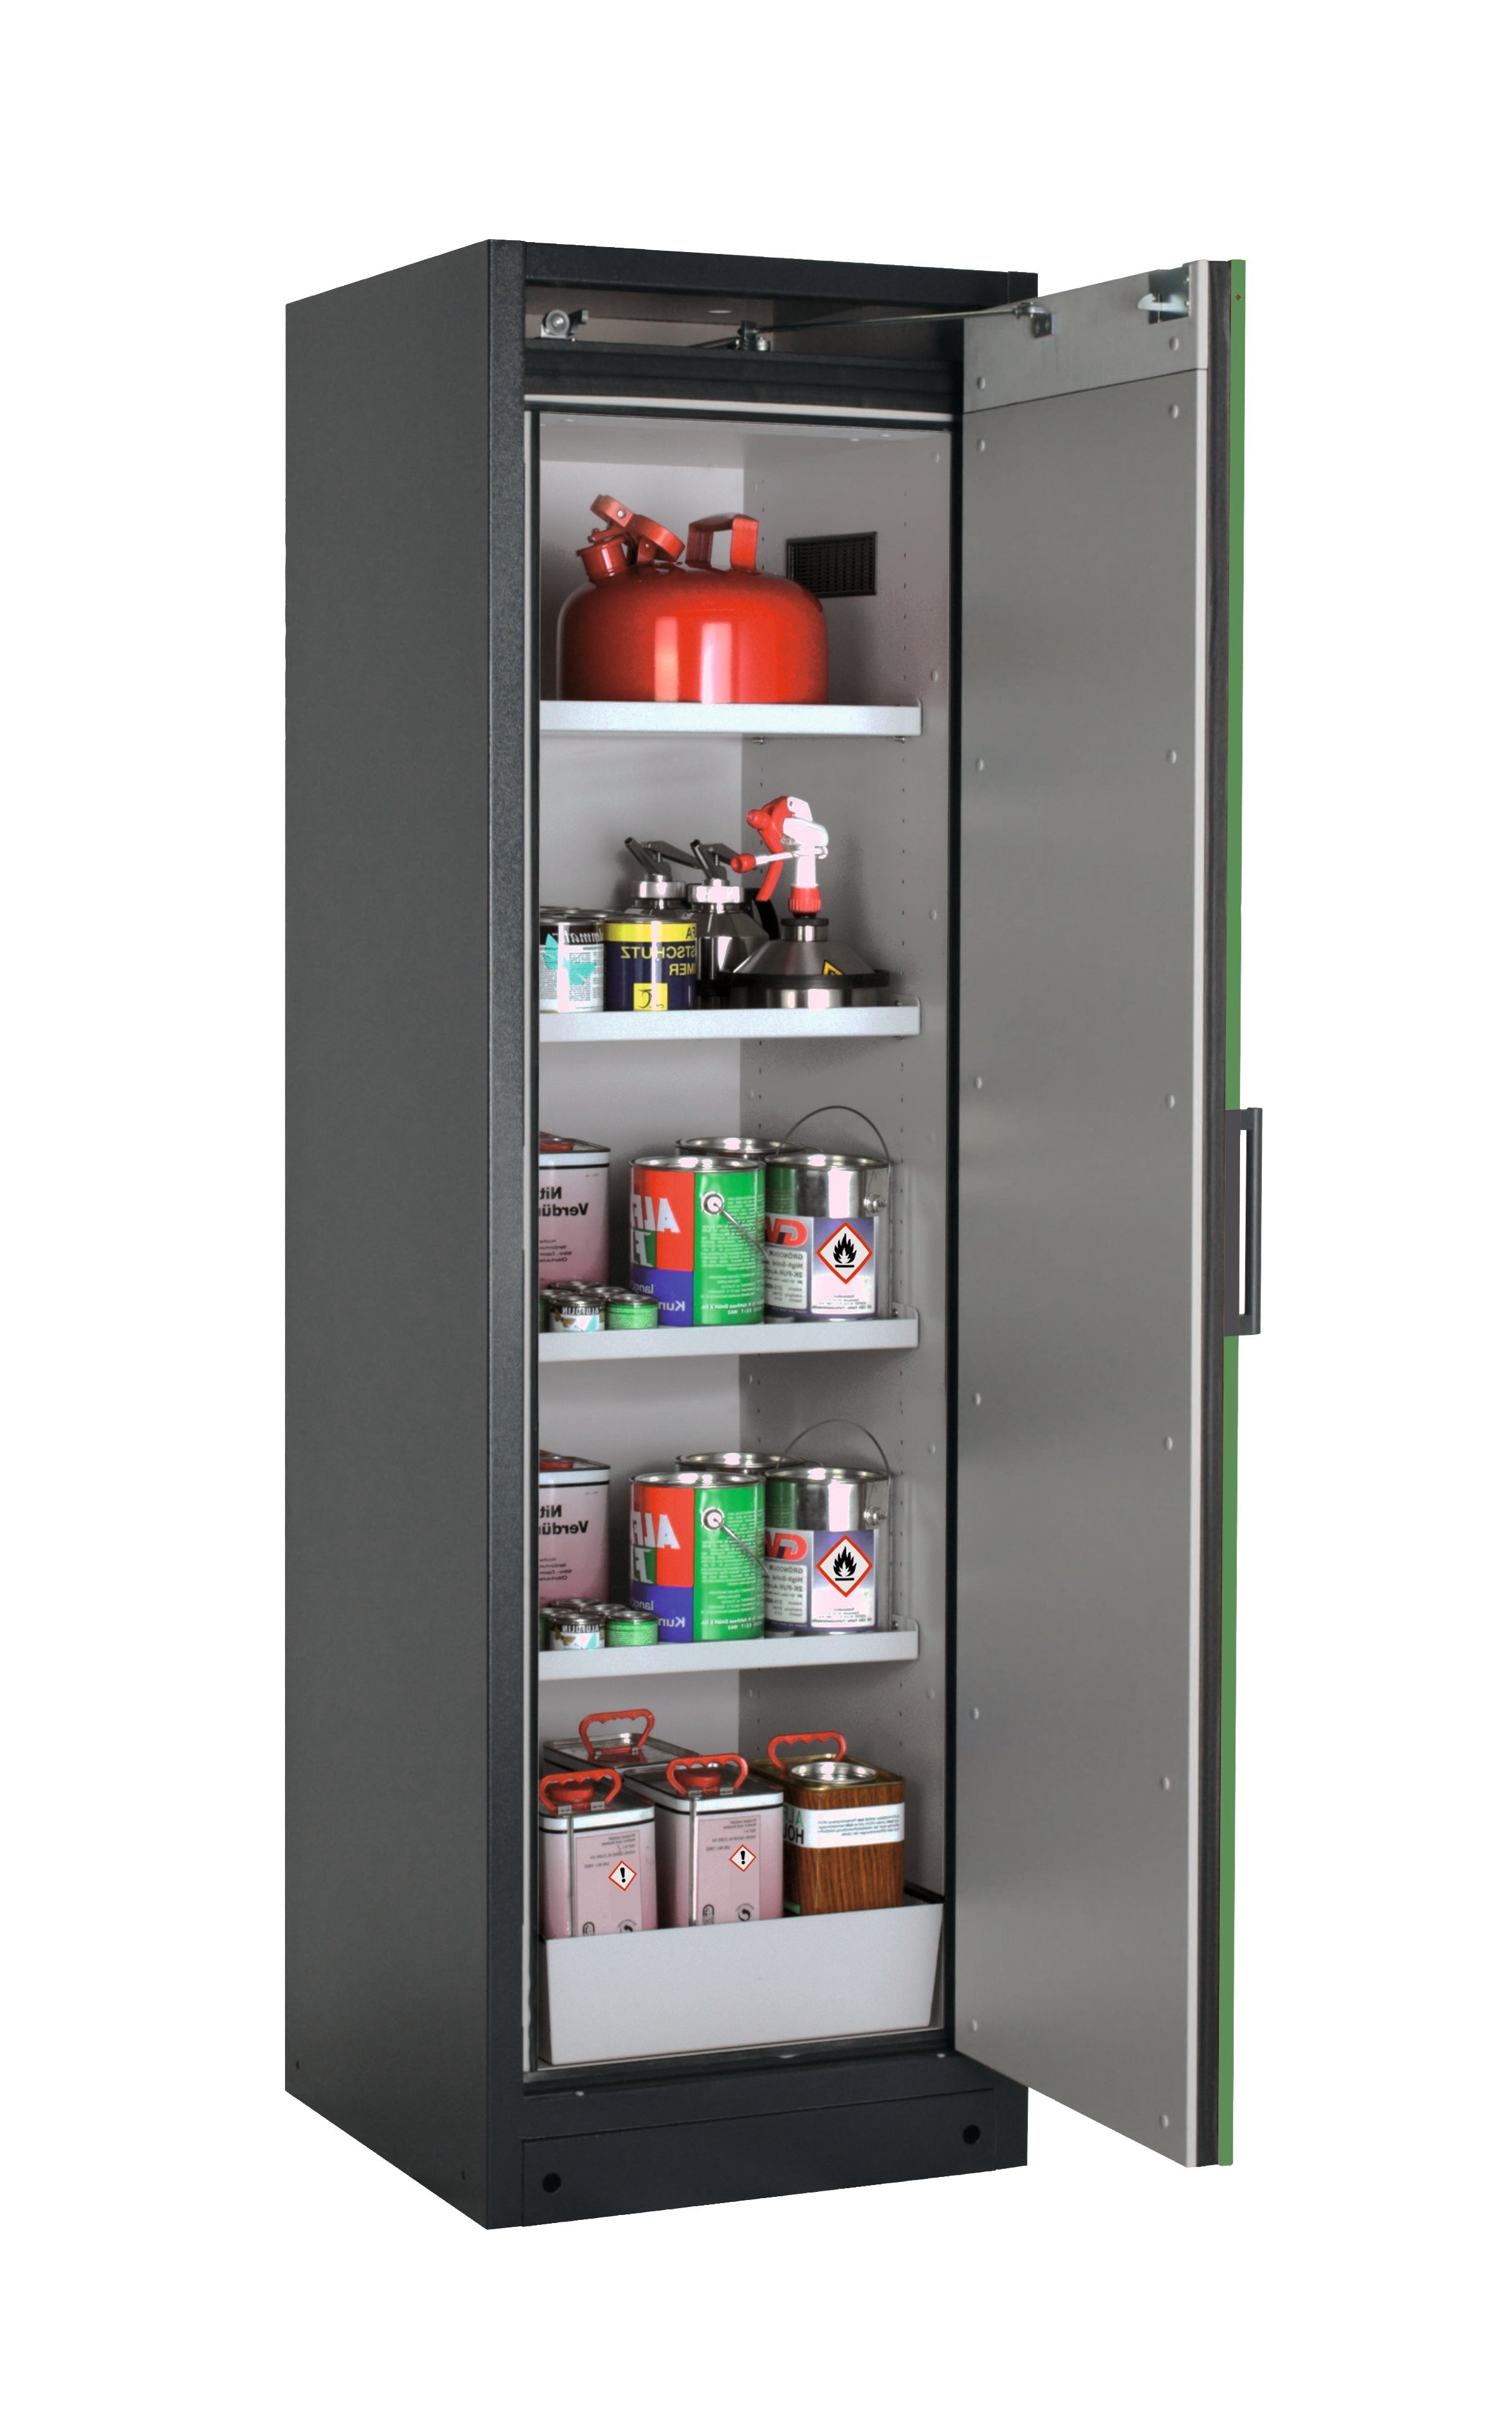 Type 90 safety storage cabinet Q-CLASSIC-90 model Q90.195.060.R in reseda green RAL 6011 with 4x shelf standard (sheet steel),